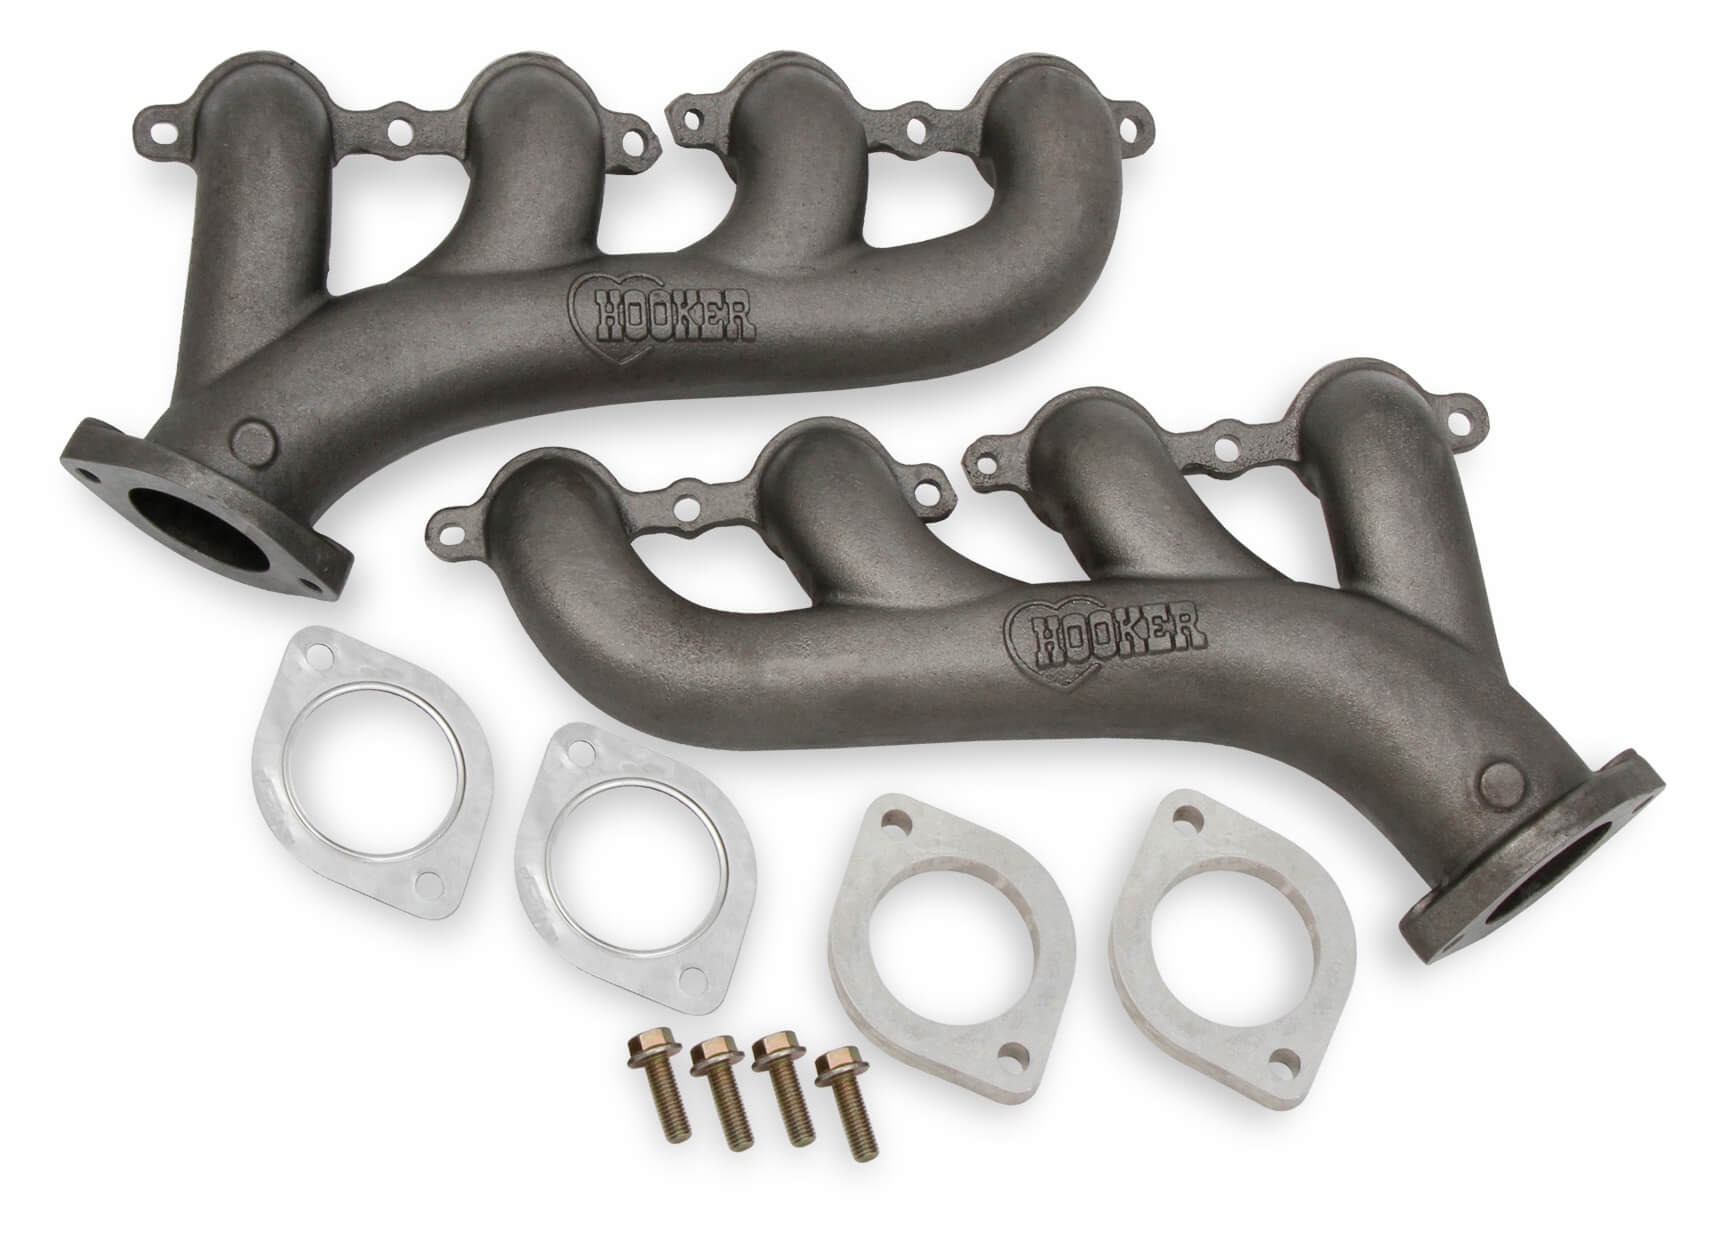 GM LS Series Hooker Headers Exhaust Manifolds w/2.5" Outlet - Natural Cast Finish